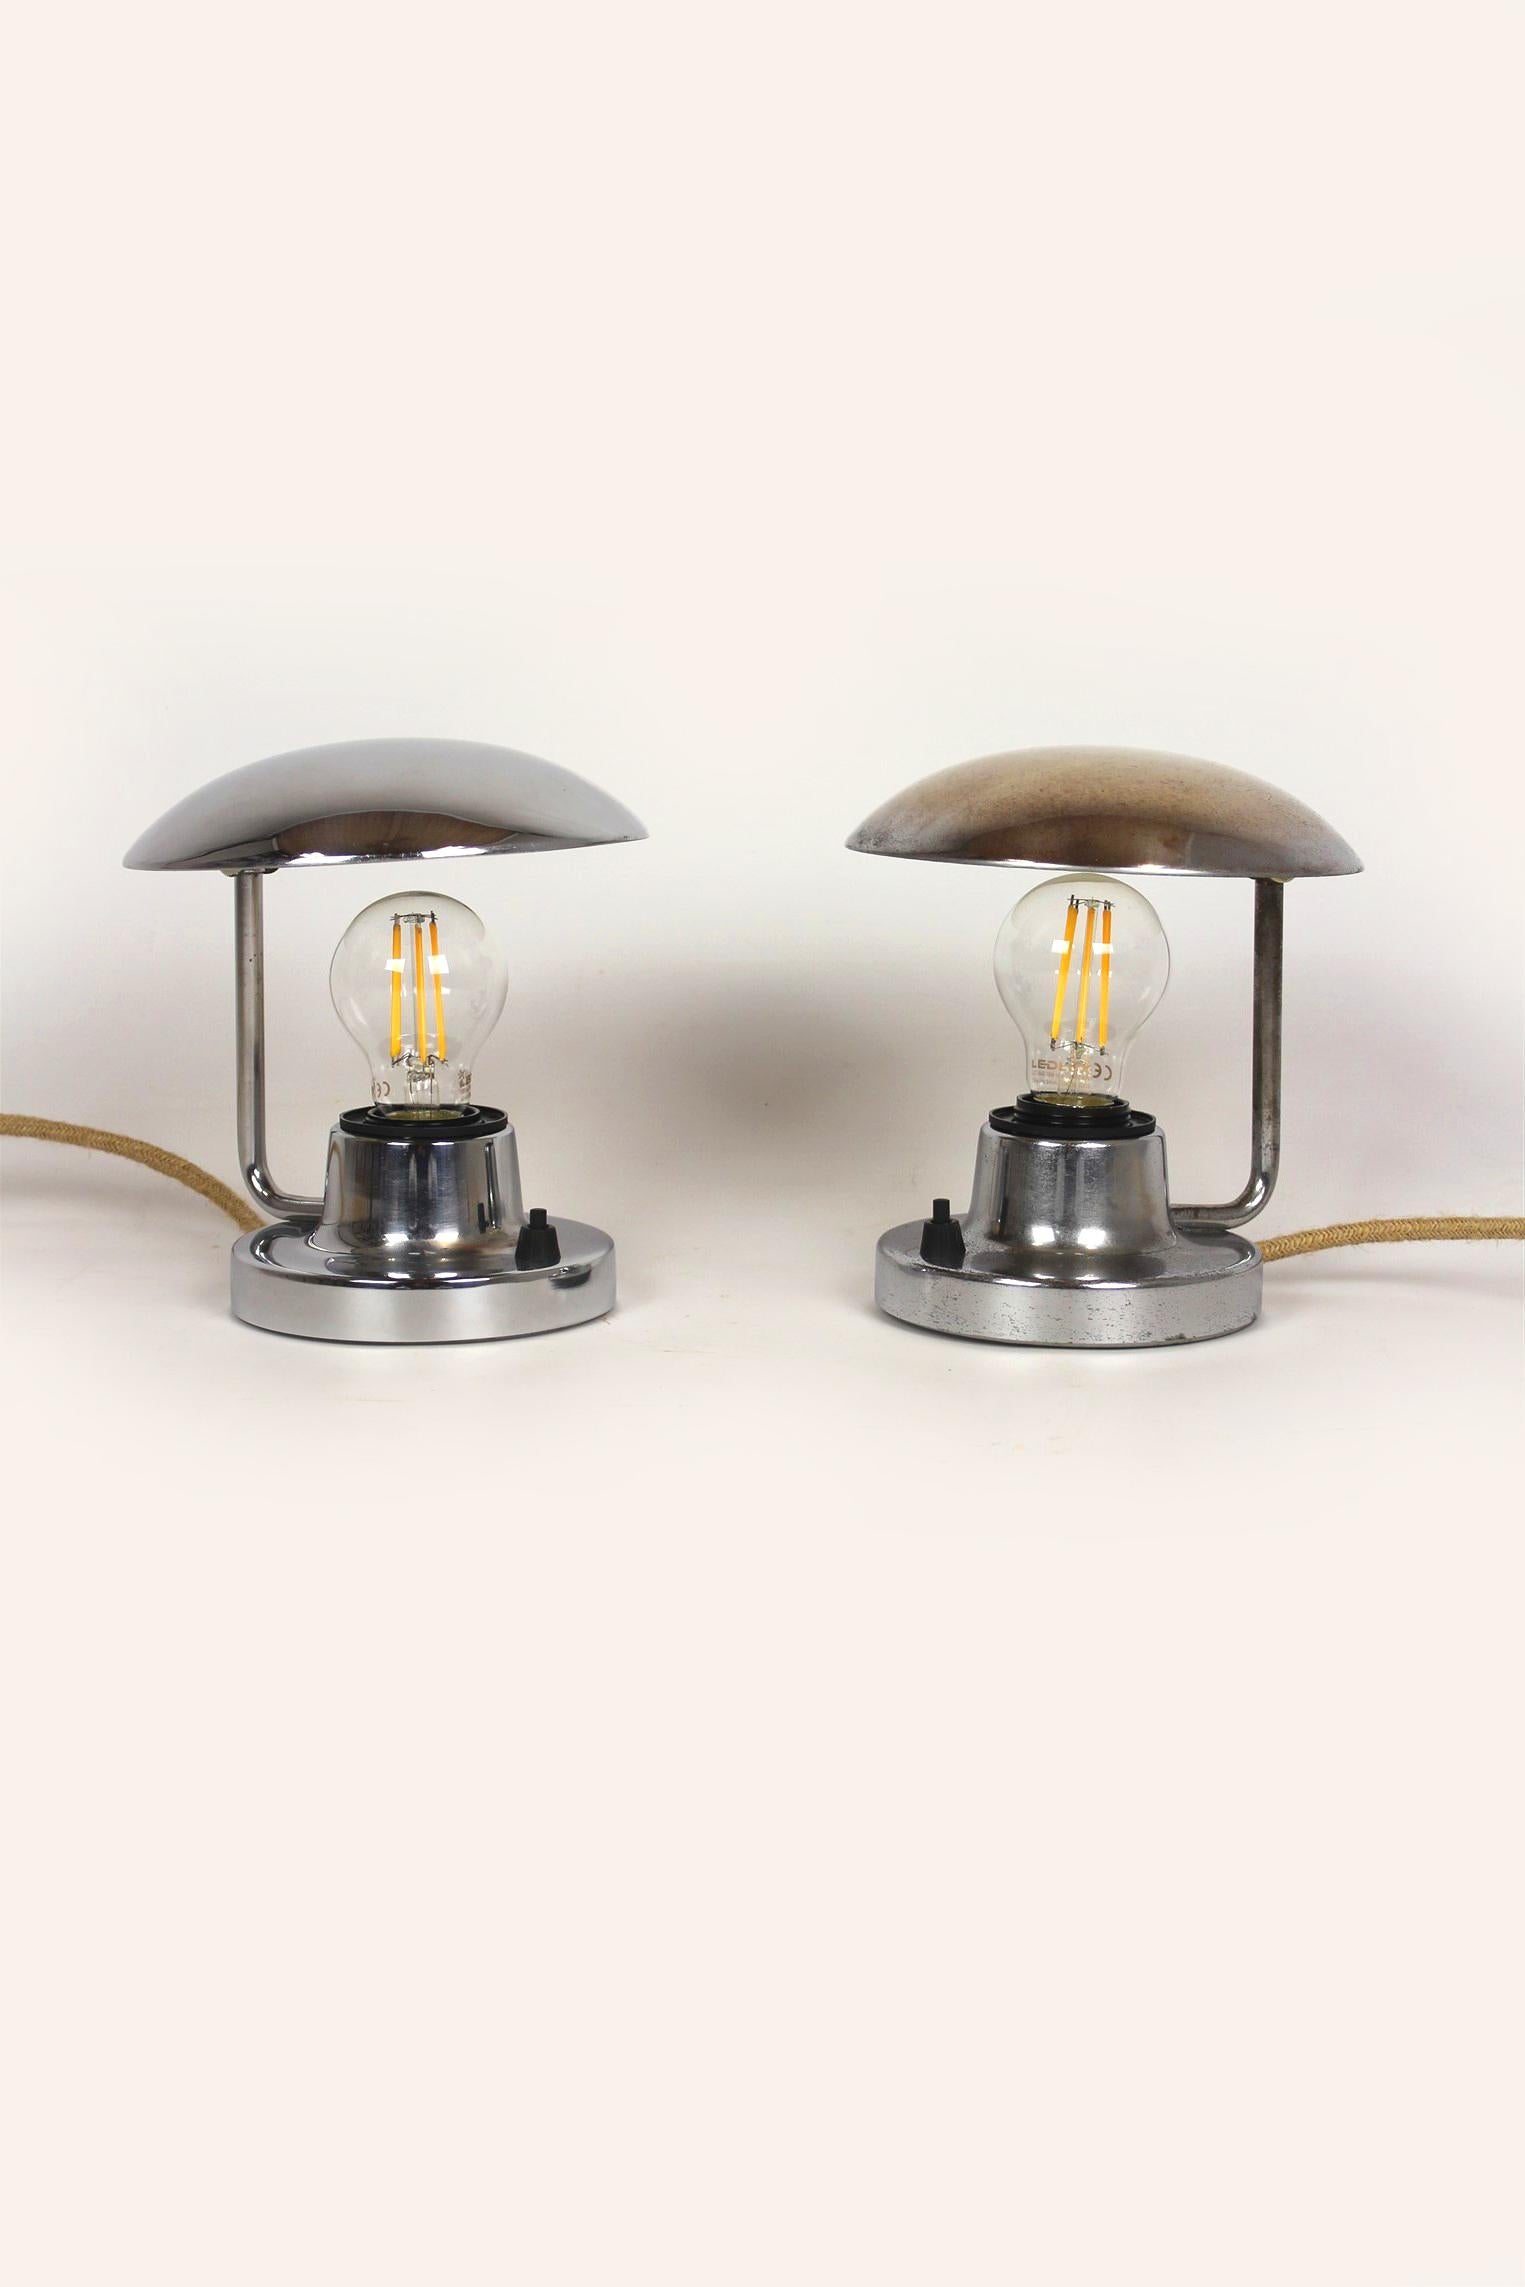 These chrome table lamps (type 1195) in the Bauhaus style were manufactured by Napako in the 1940s in the Czech Republic. The lamps have new electrical installations and retro-style jute wires. Fully functional, shipped with the bulbs shown in the